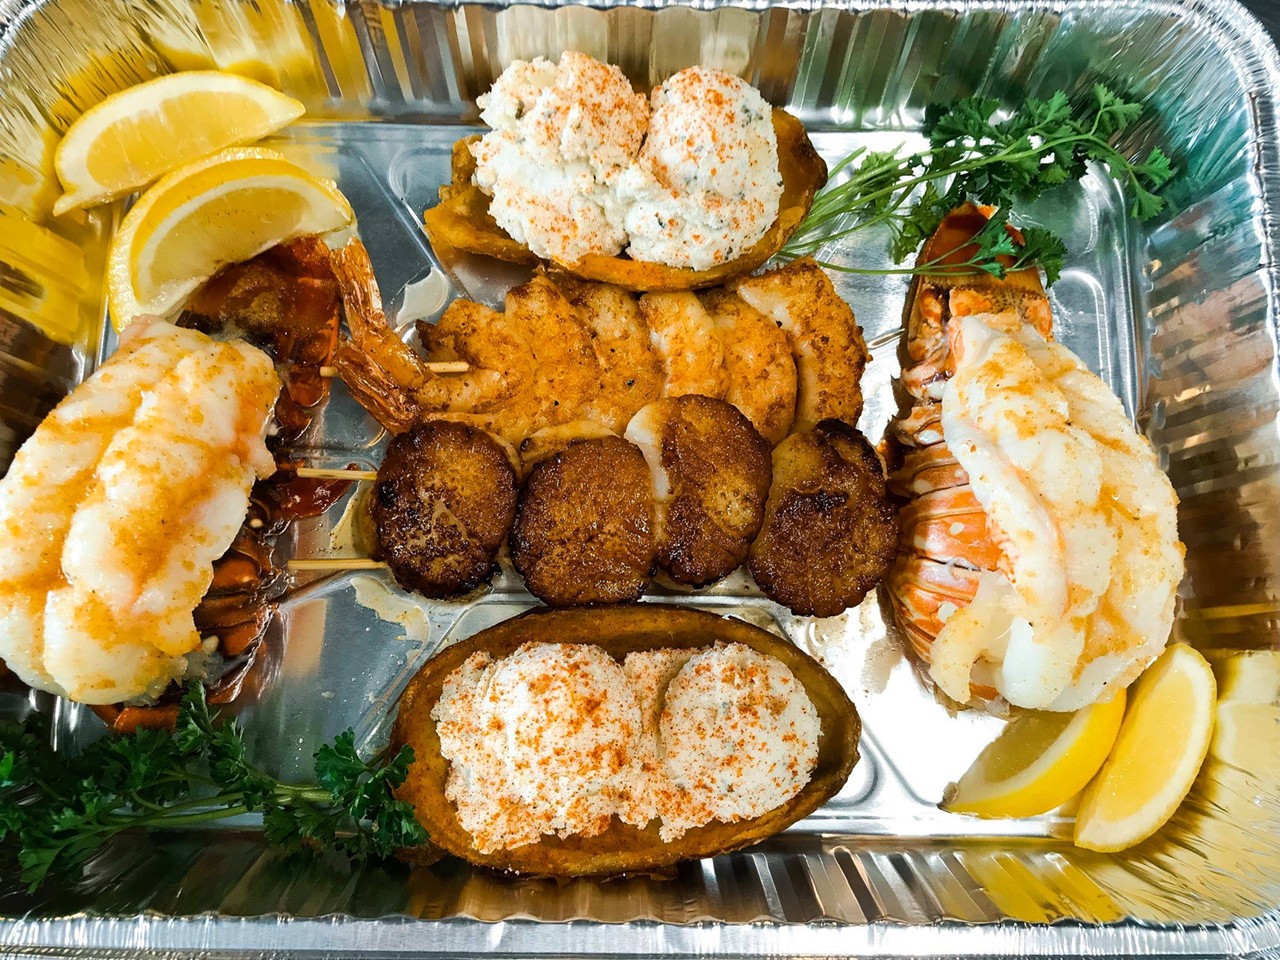  Carver&#146;s Fish House
911 Douglas Ave, Dunedin, FL 34698, (727) 735-0755  
Serving up the freshest seafood around since 1984, Jensen Seafood Bros opened up Carver&#146;s Fish House last year. It has a simple, but an extensive menu of scallops, clams, fish and pretty much anything that can be found in the Atlantic Ocean. Snag it to-go or dine on the patio.
Photo via